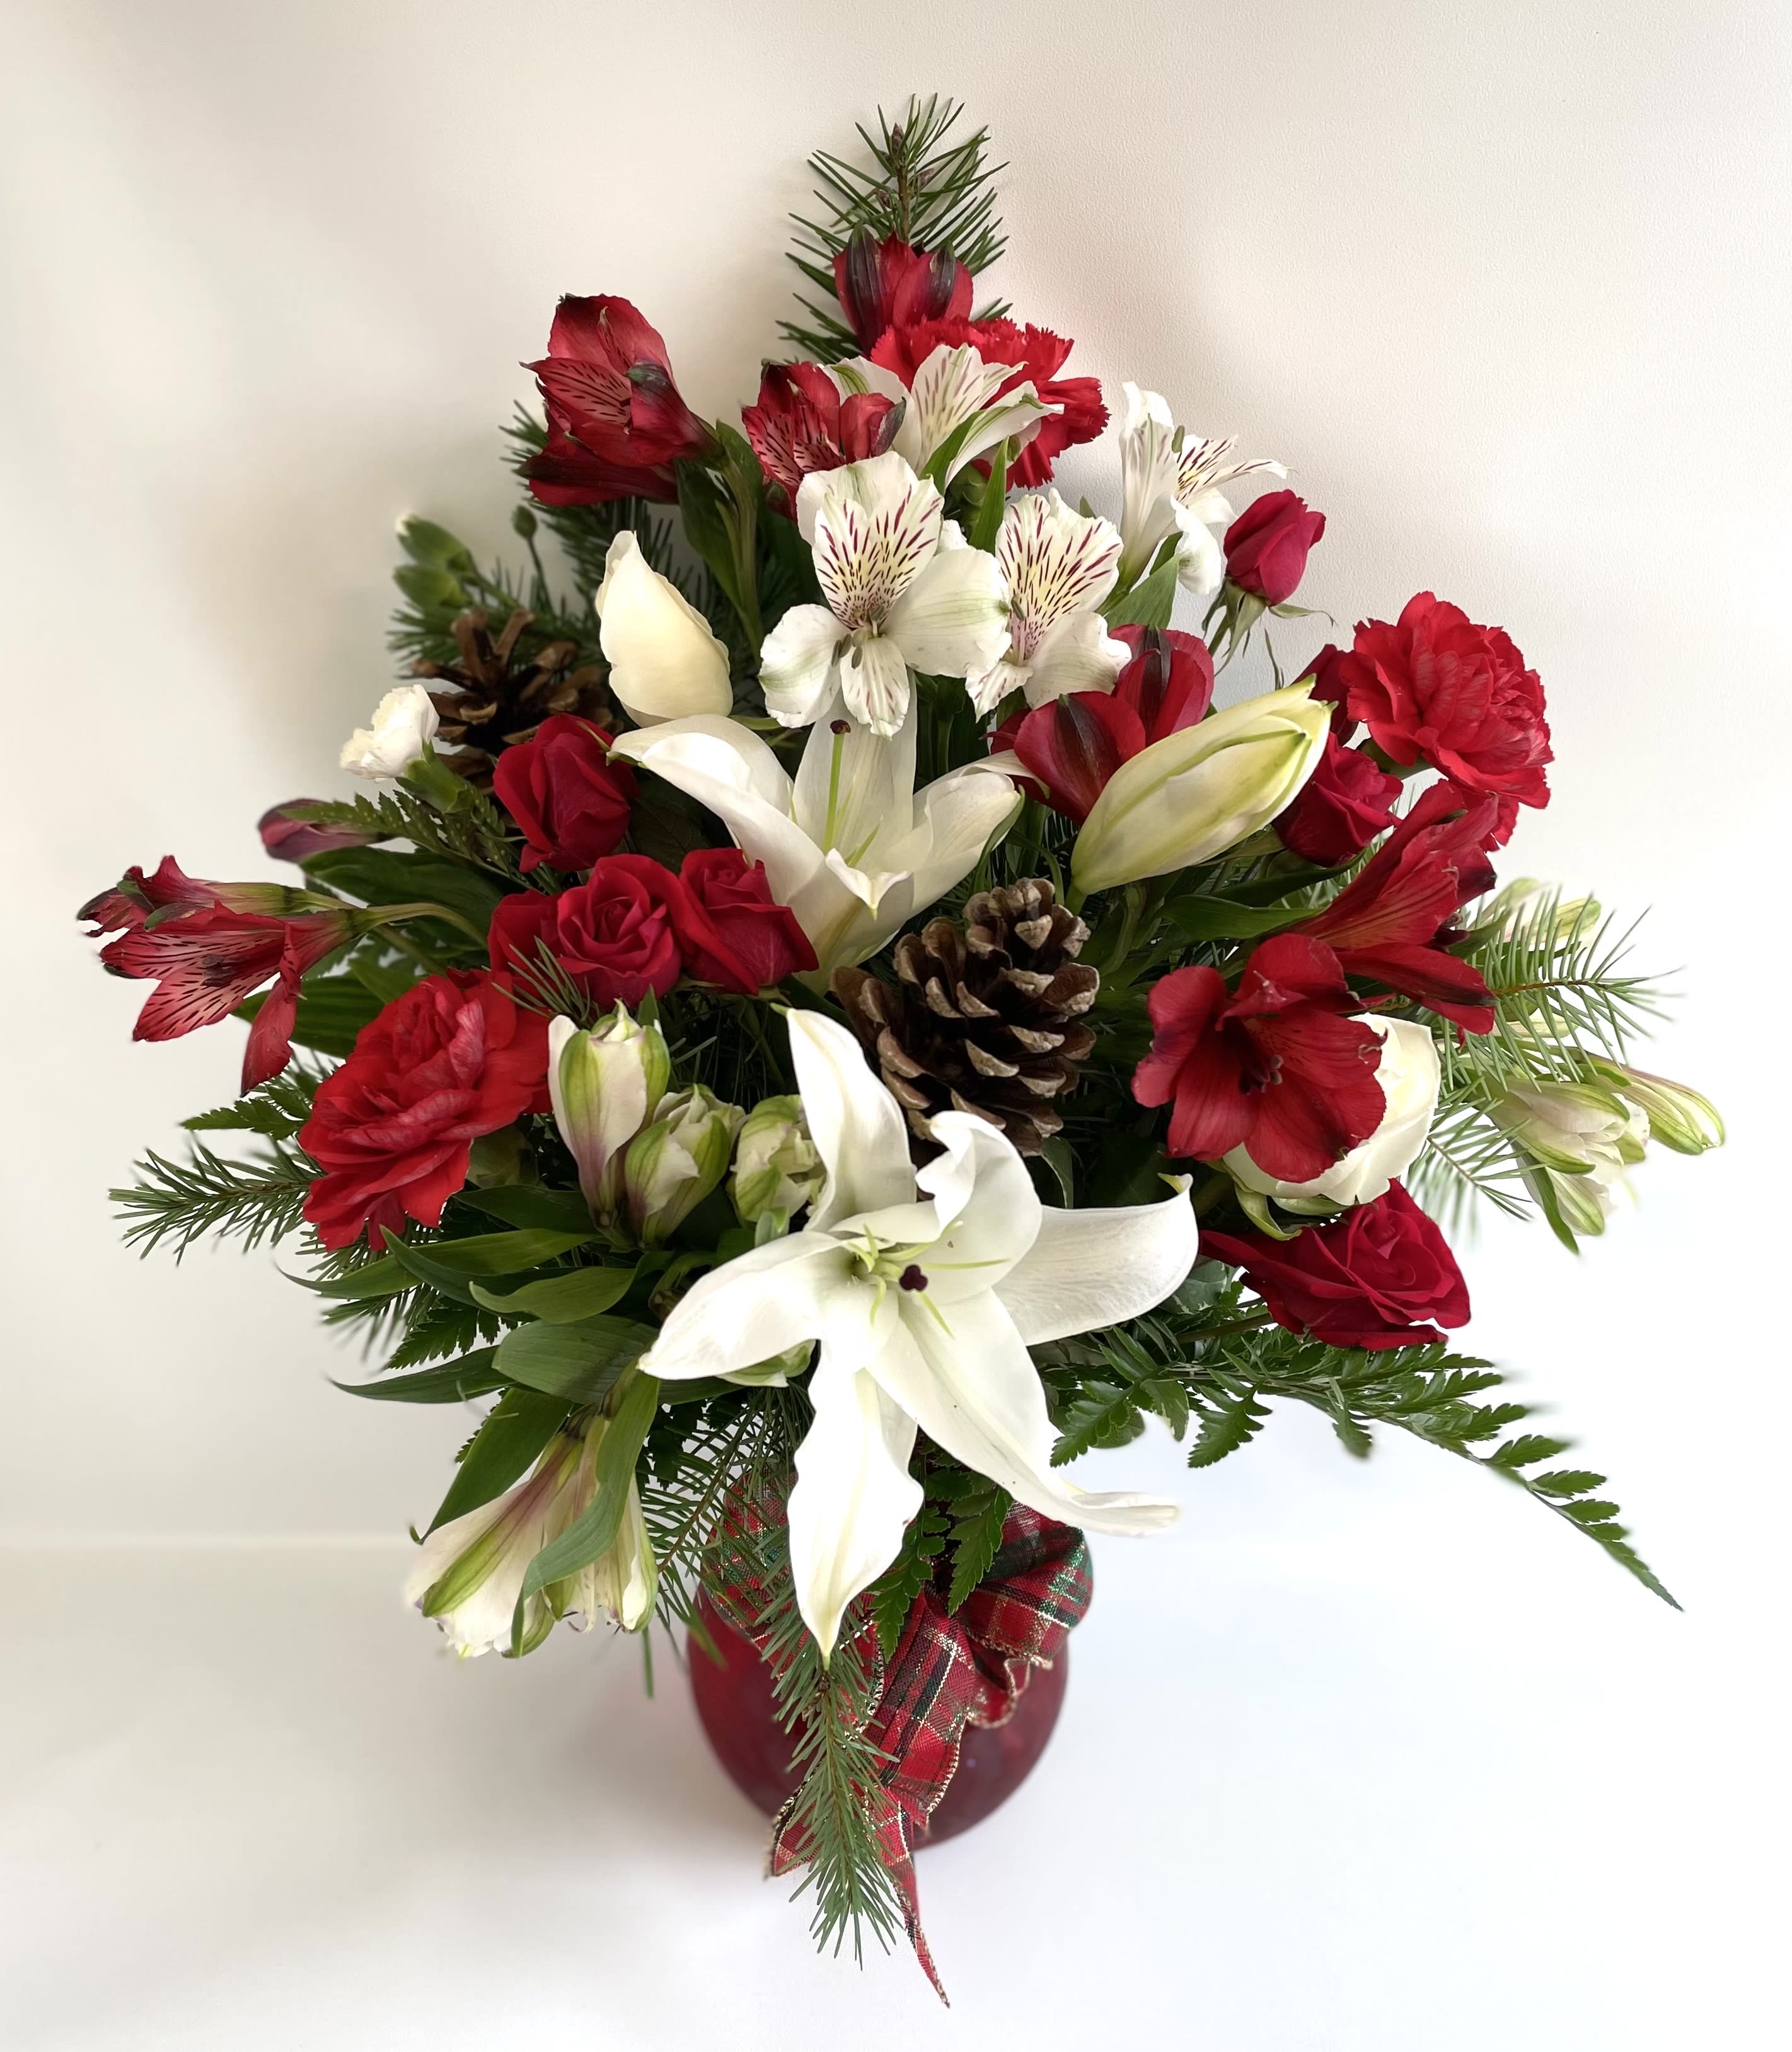 52 Christmas Centerpieces For Your Holiday Table